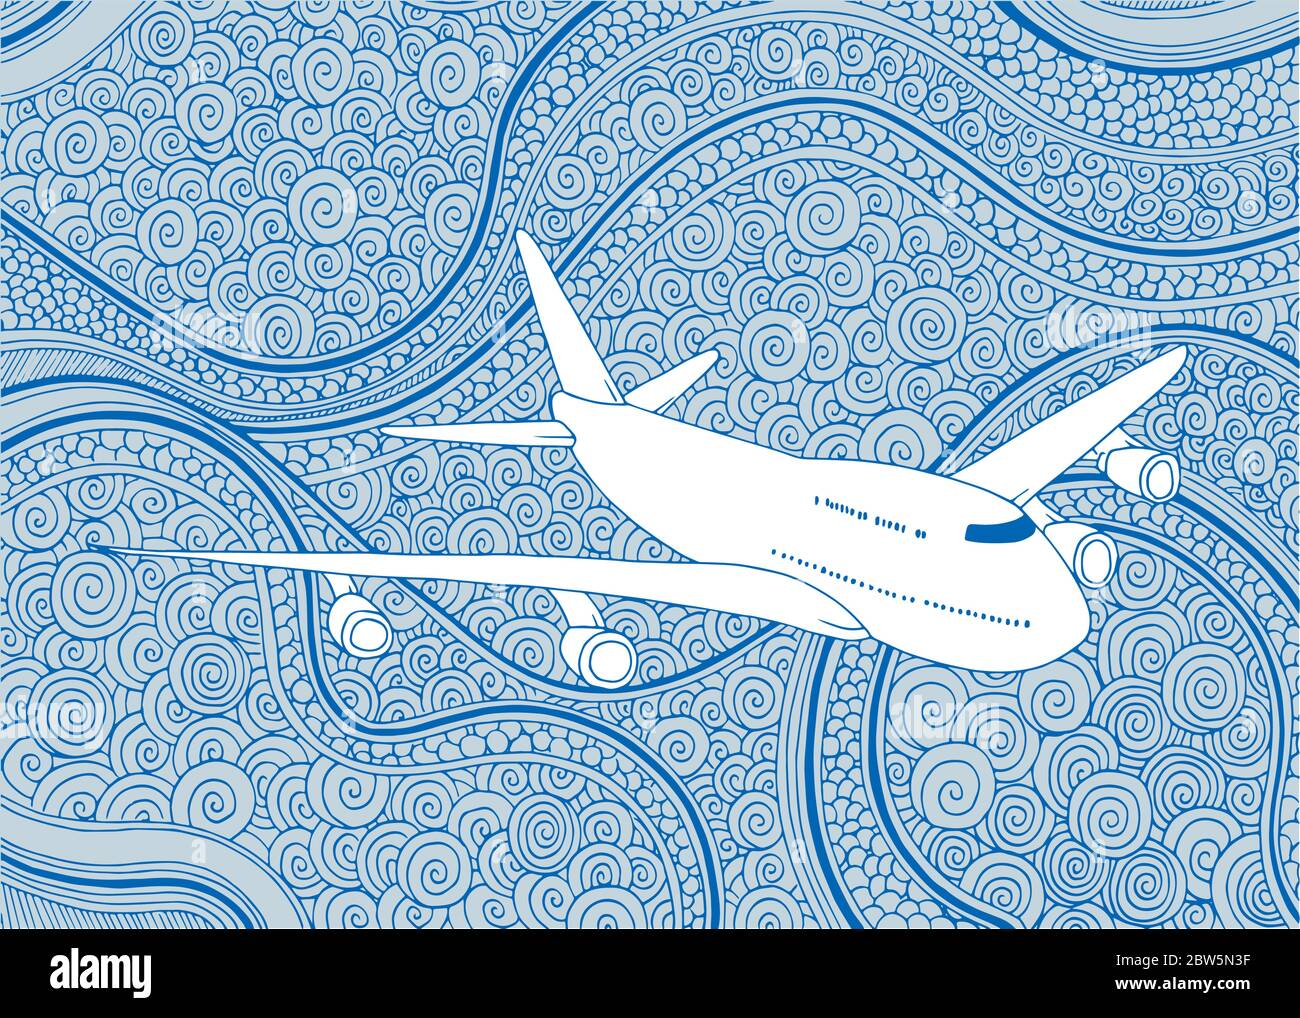 Airplane. Aircraft hand drawn vector illustration. Plane sketch drawing on doodle background. Stock Vector